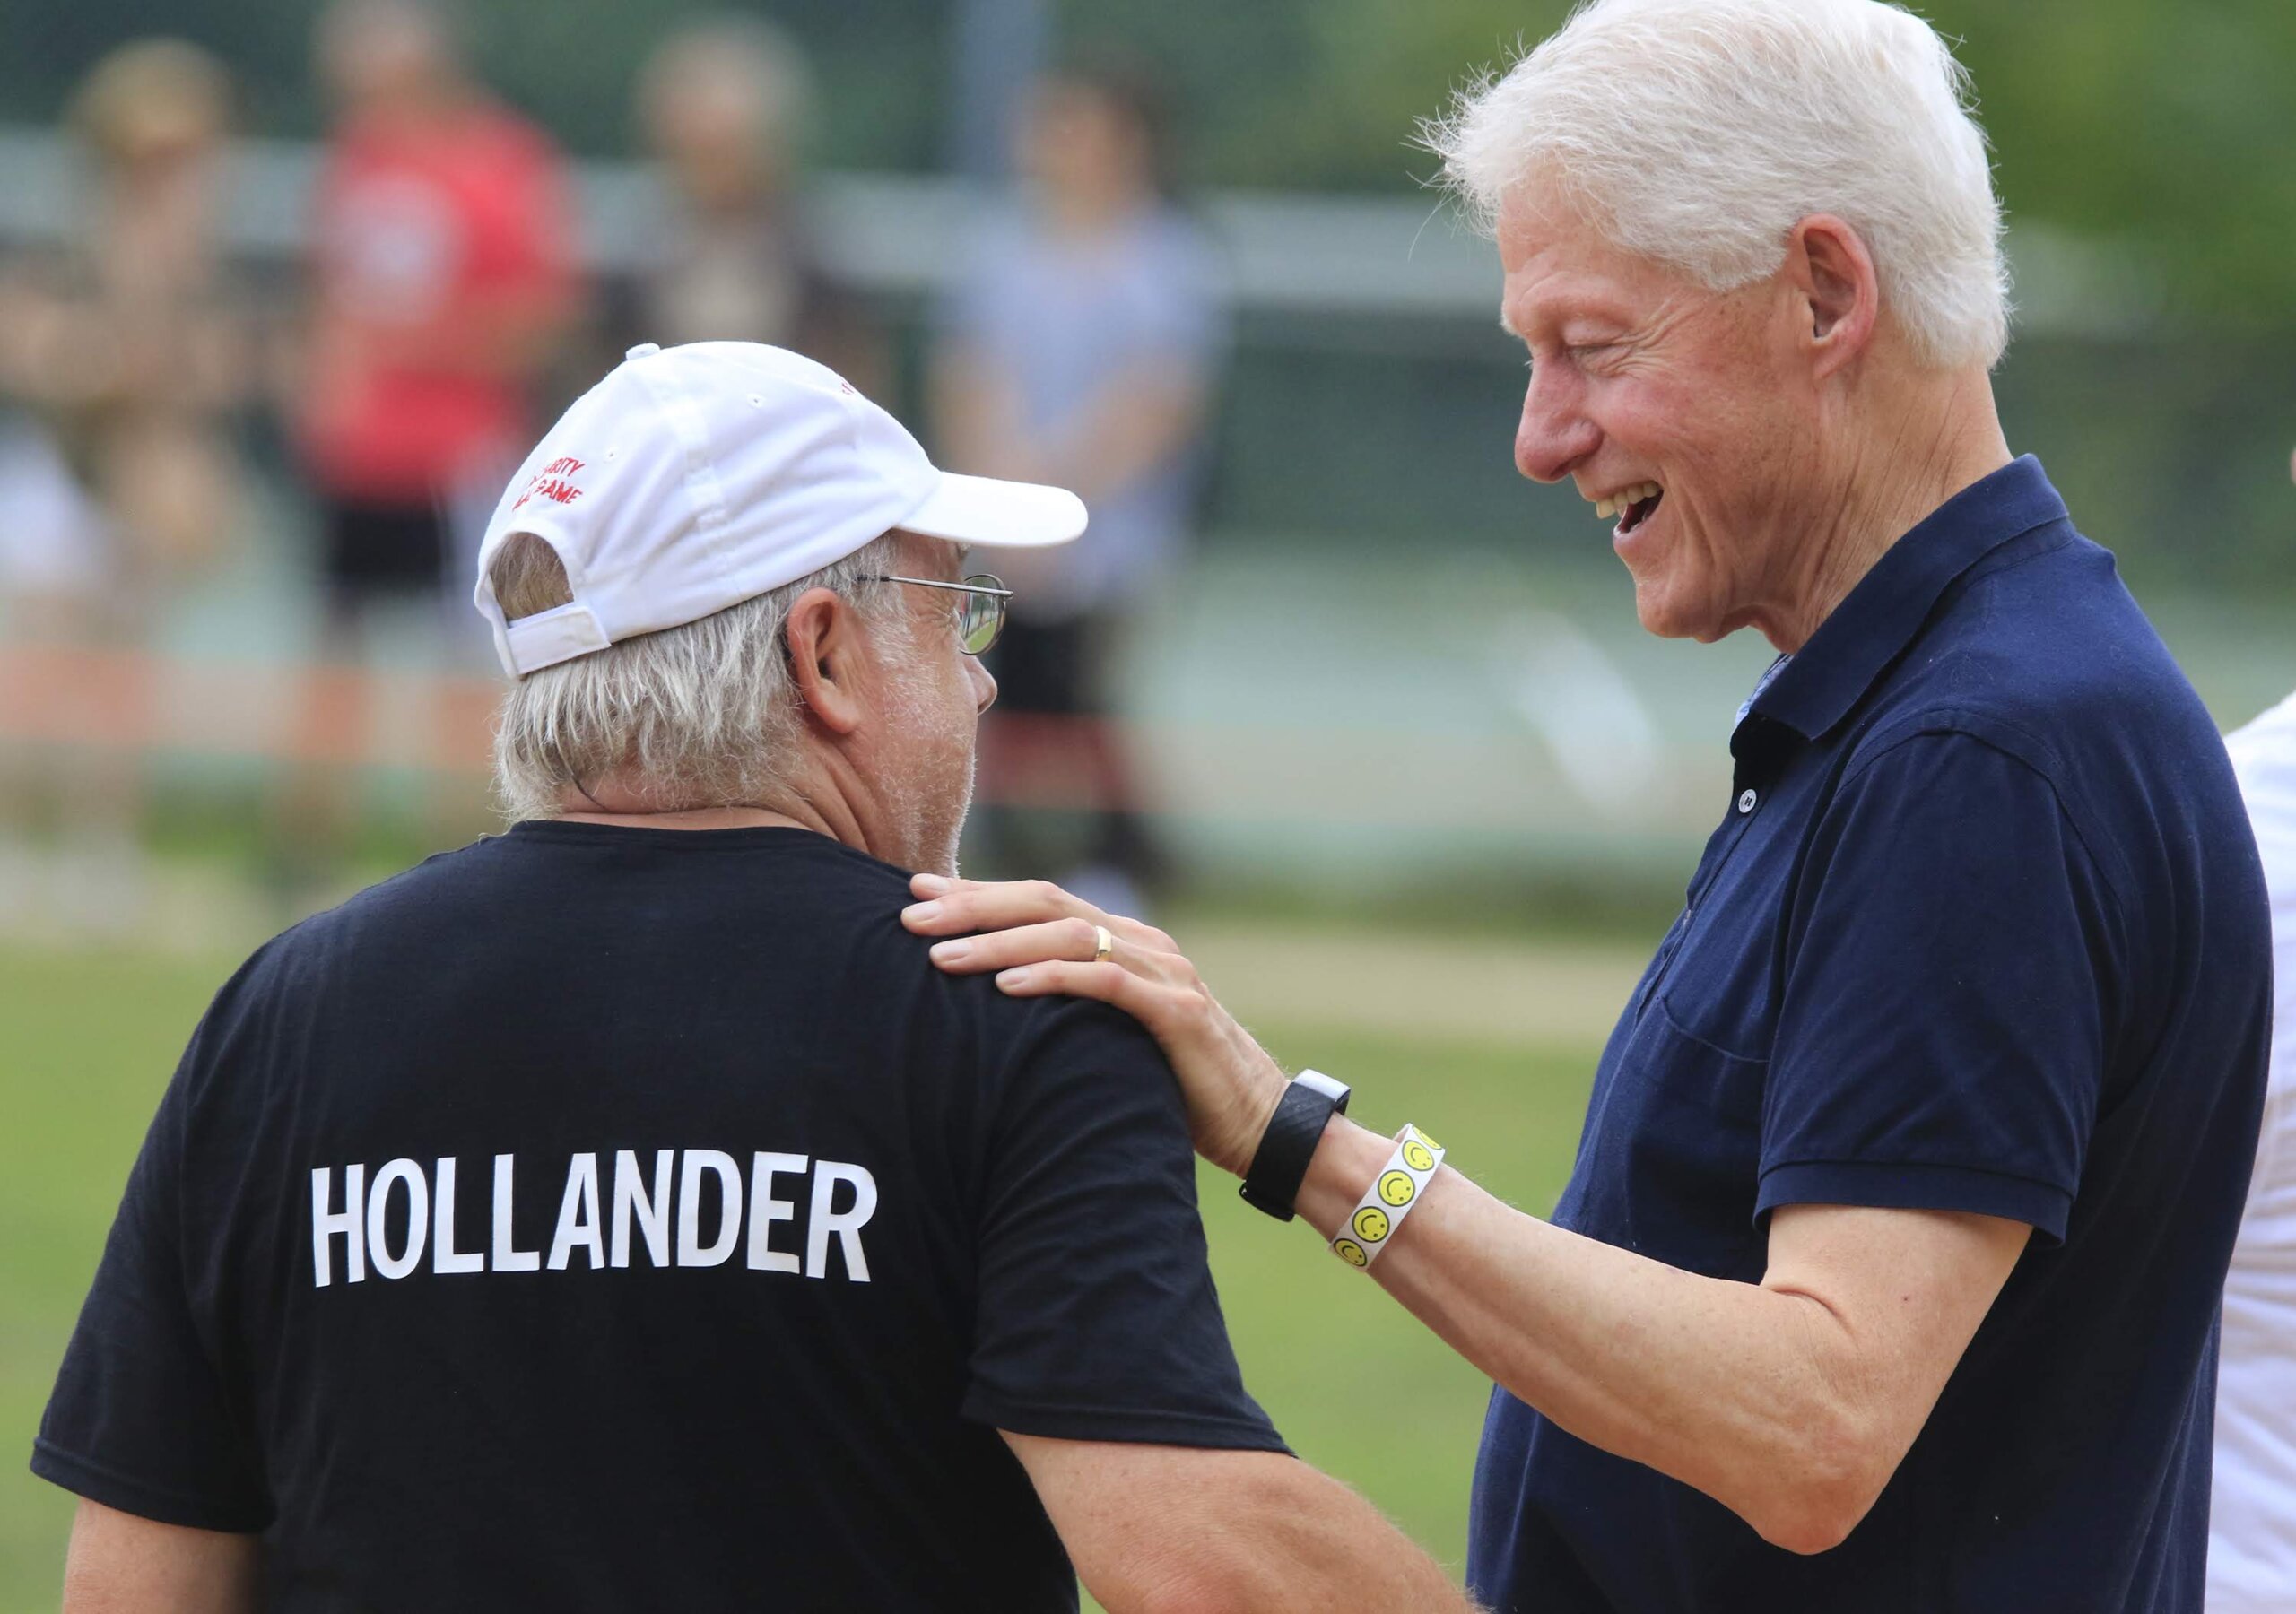 Hollander and Bill Clinton at the Artists & Writers Game